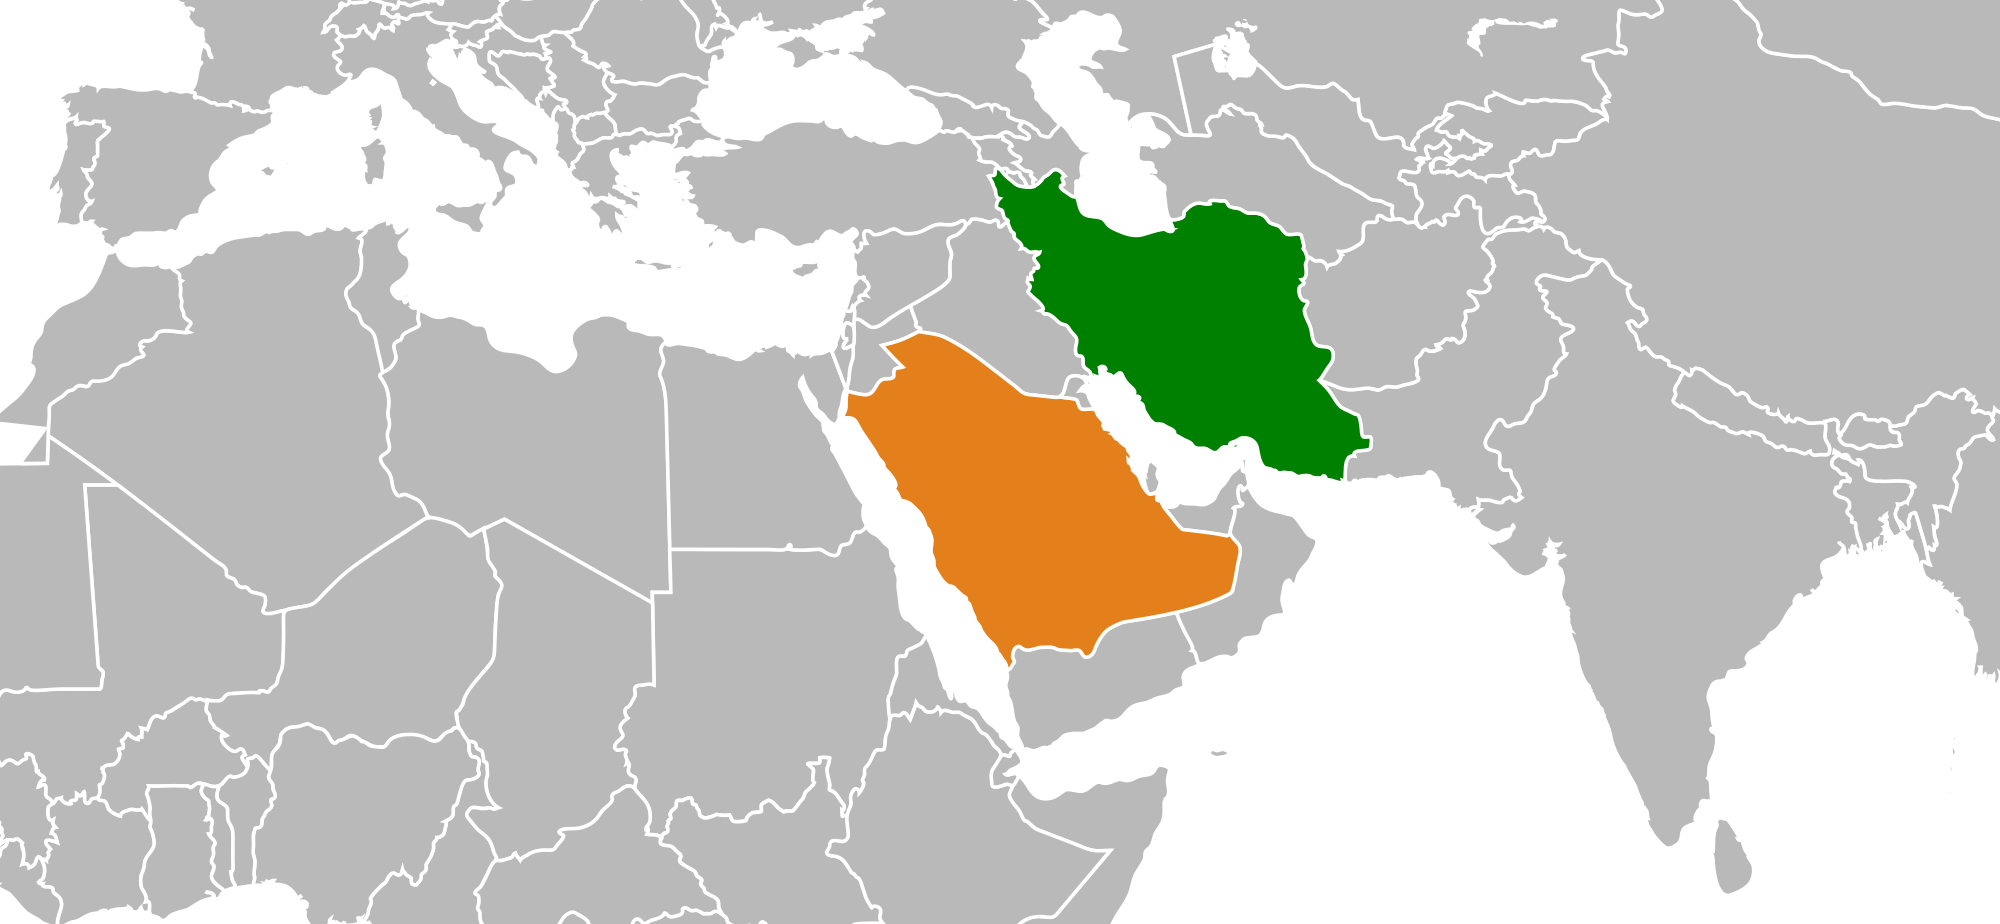 Increased Sectarian Tensions in the Middle East as the Saudi-Iran Proxy War Heats Up